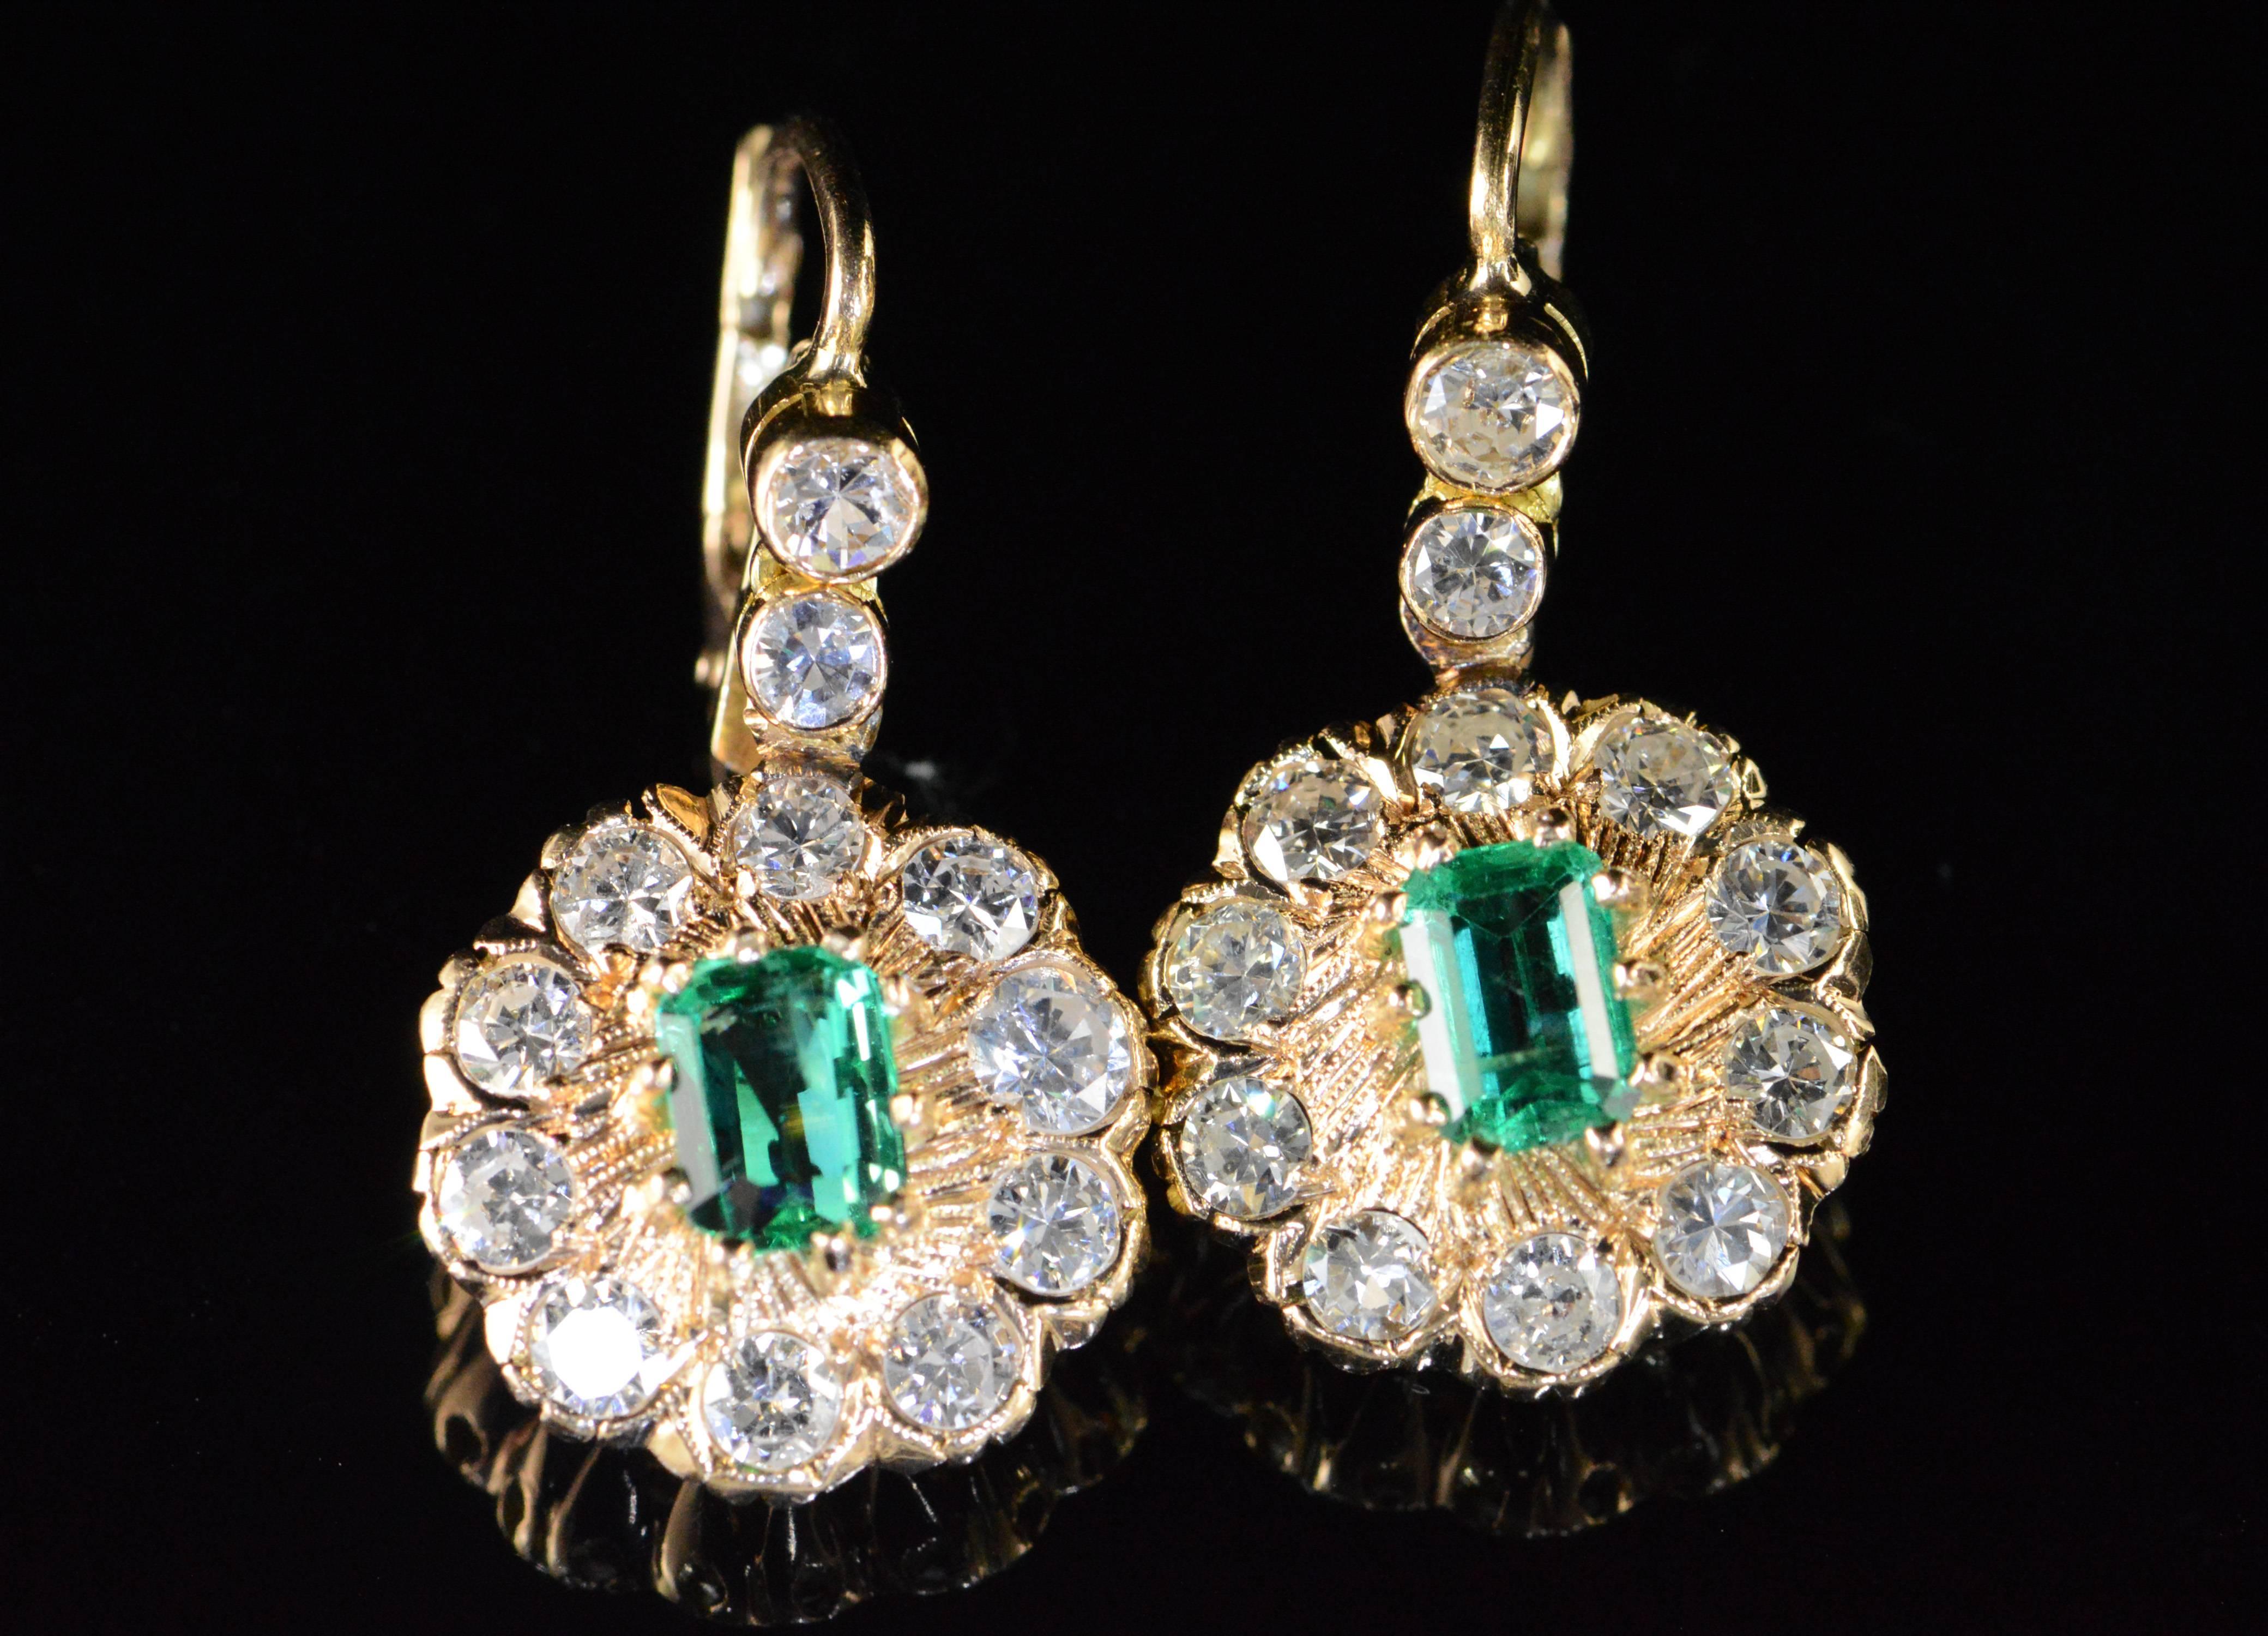  1.50 Carats Emeralds 2.80 Carats Old Mine Cut Diamonds Gold Earrings For Sale 3